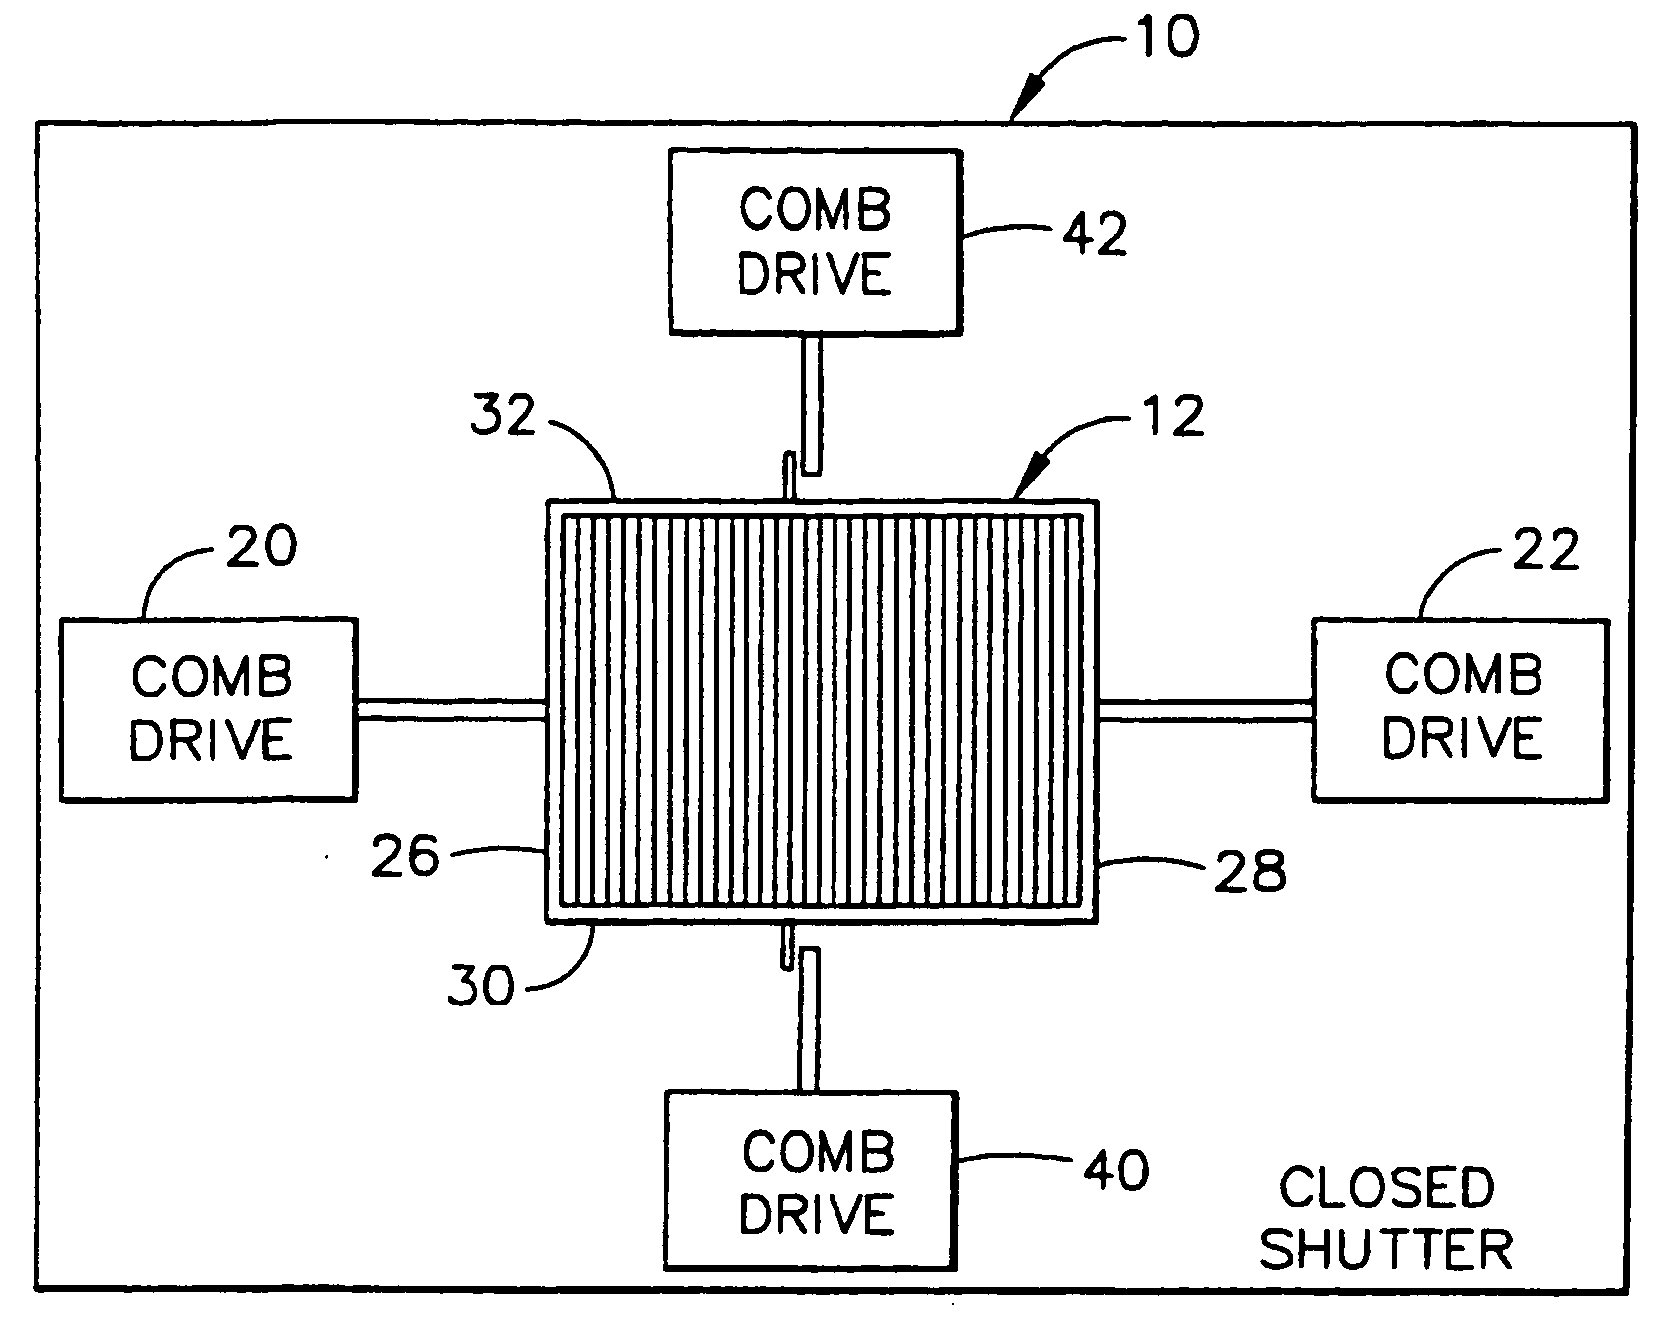 Microvalve for controlling fluid flow